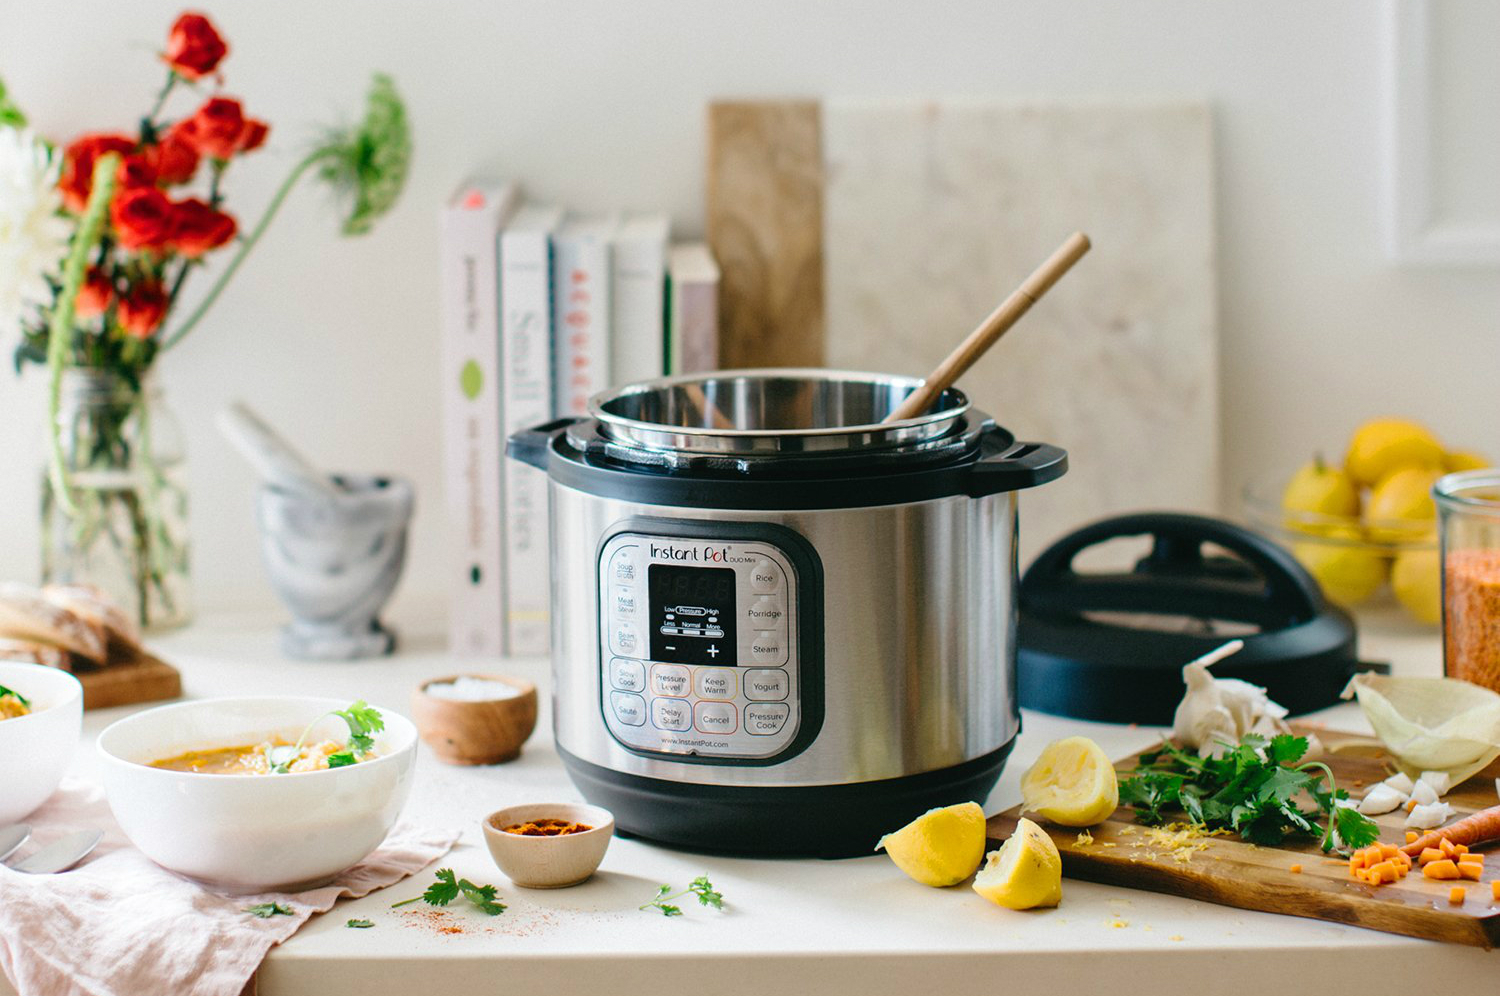 Instant Pot Duo Mini 2 pressure cooker on kitchen counter.